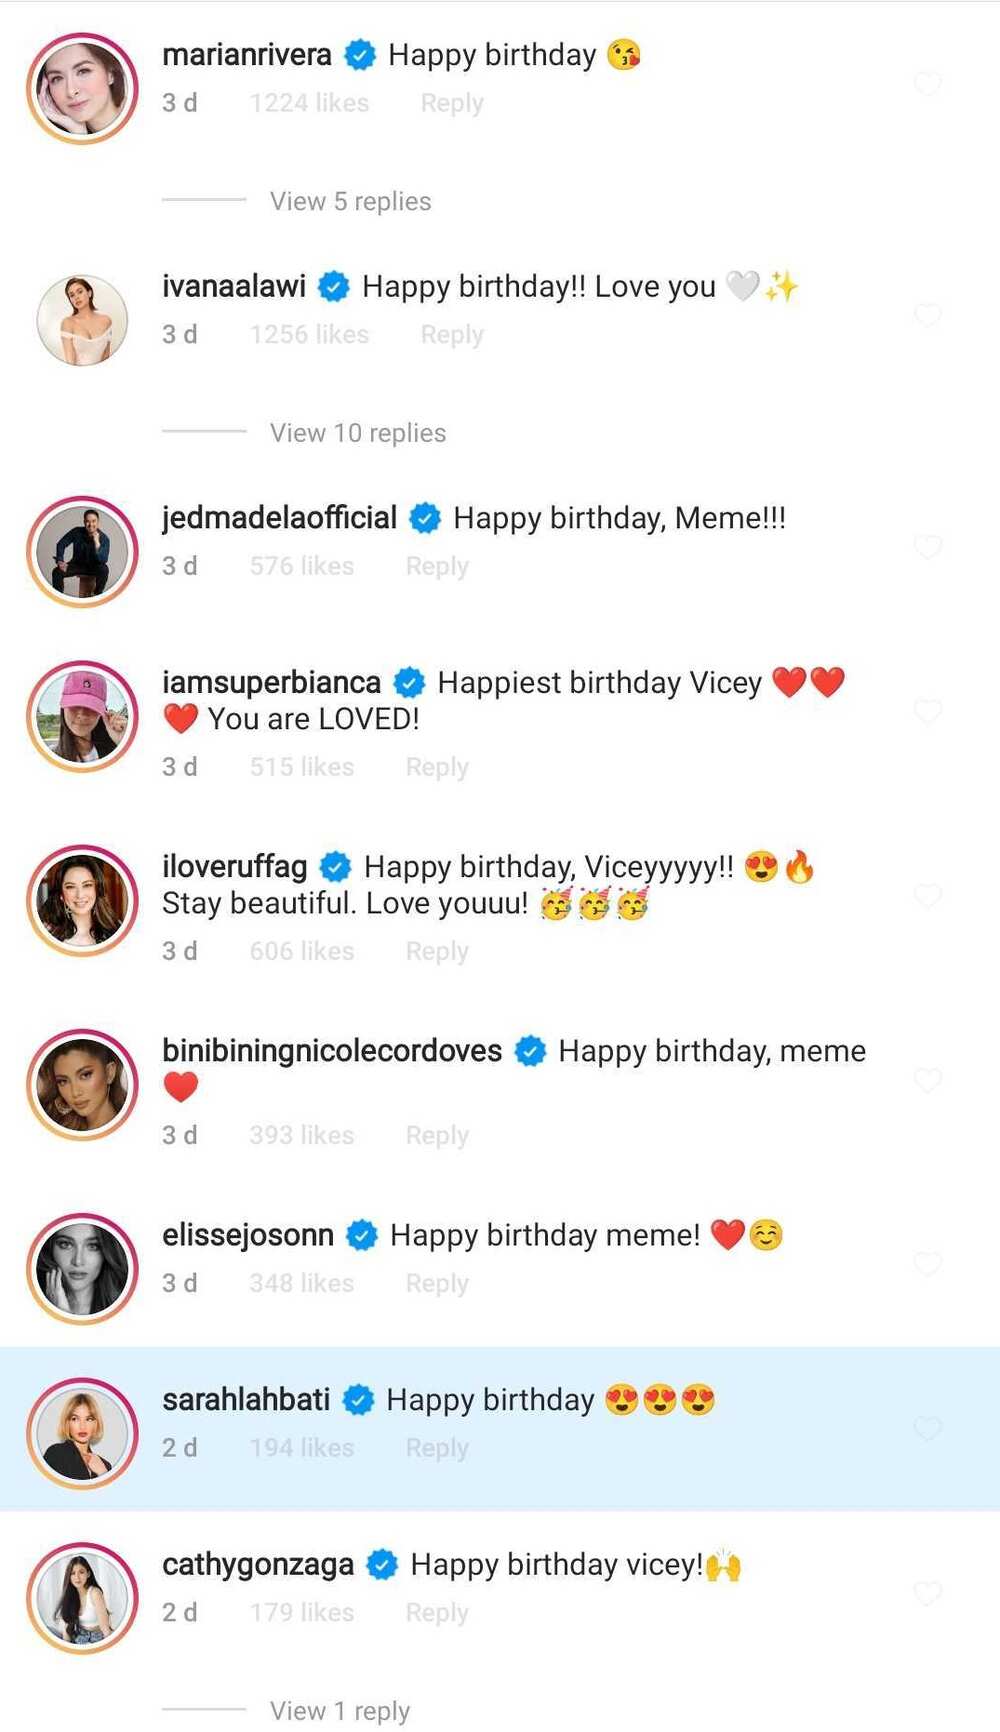 Ivana Alawi, Marian Rivera, other celebs send sweet birthday messages to Vice Ganda